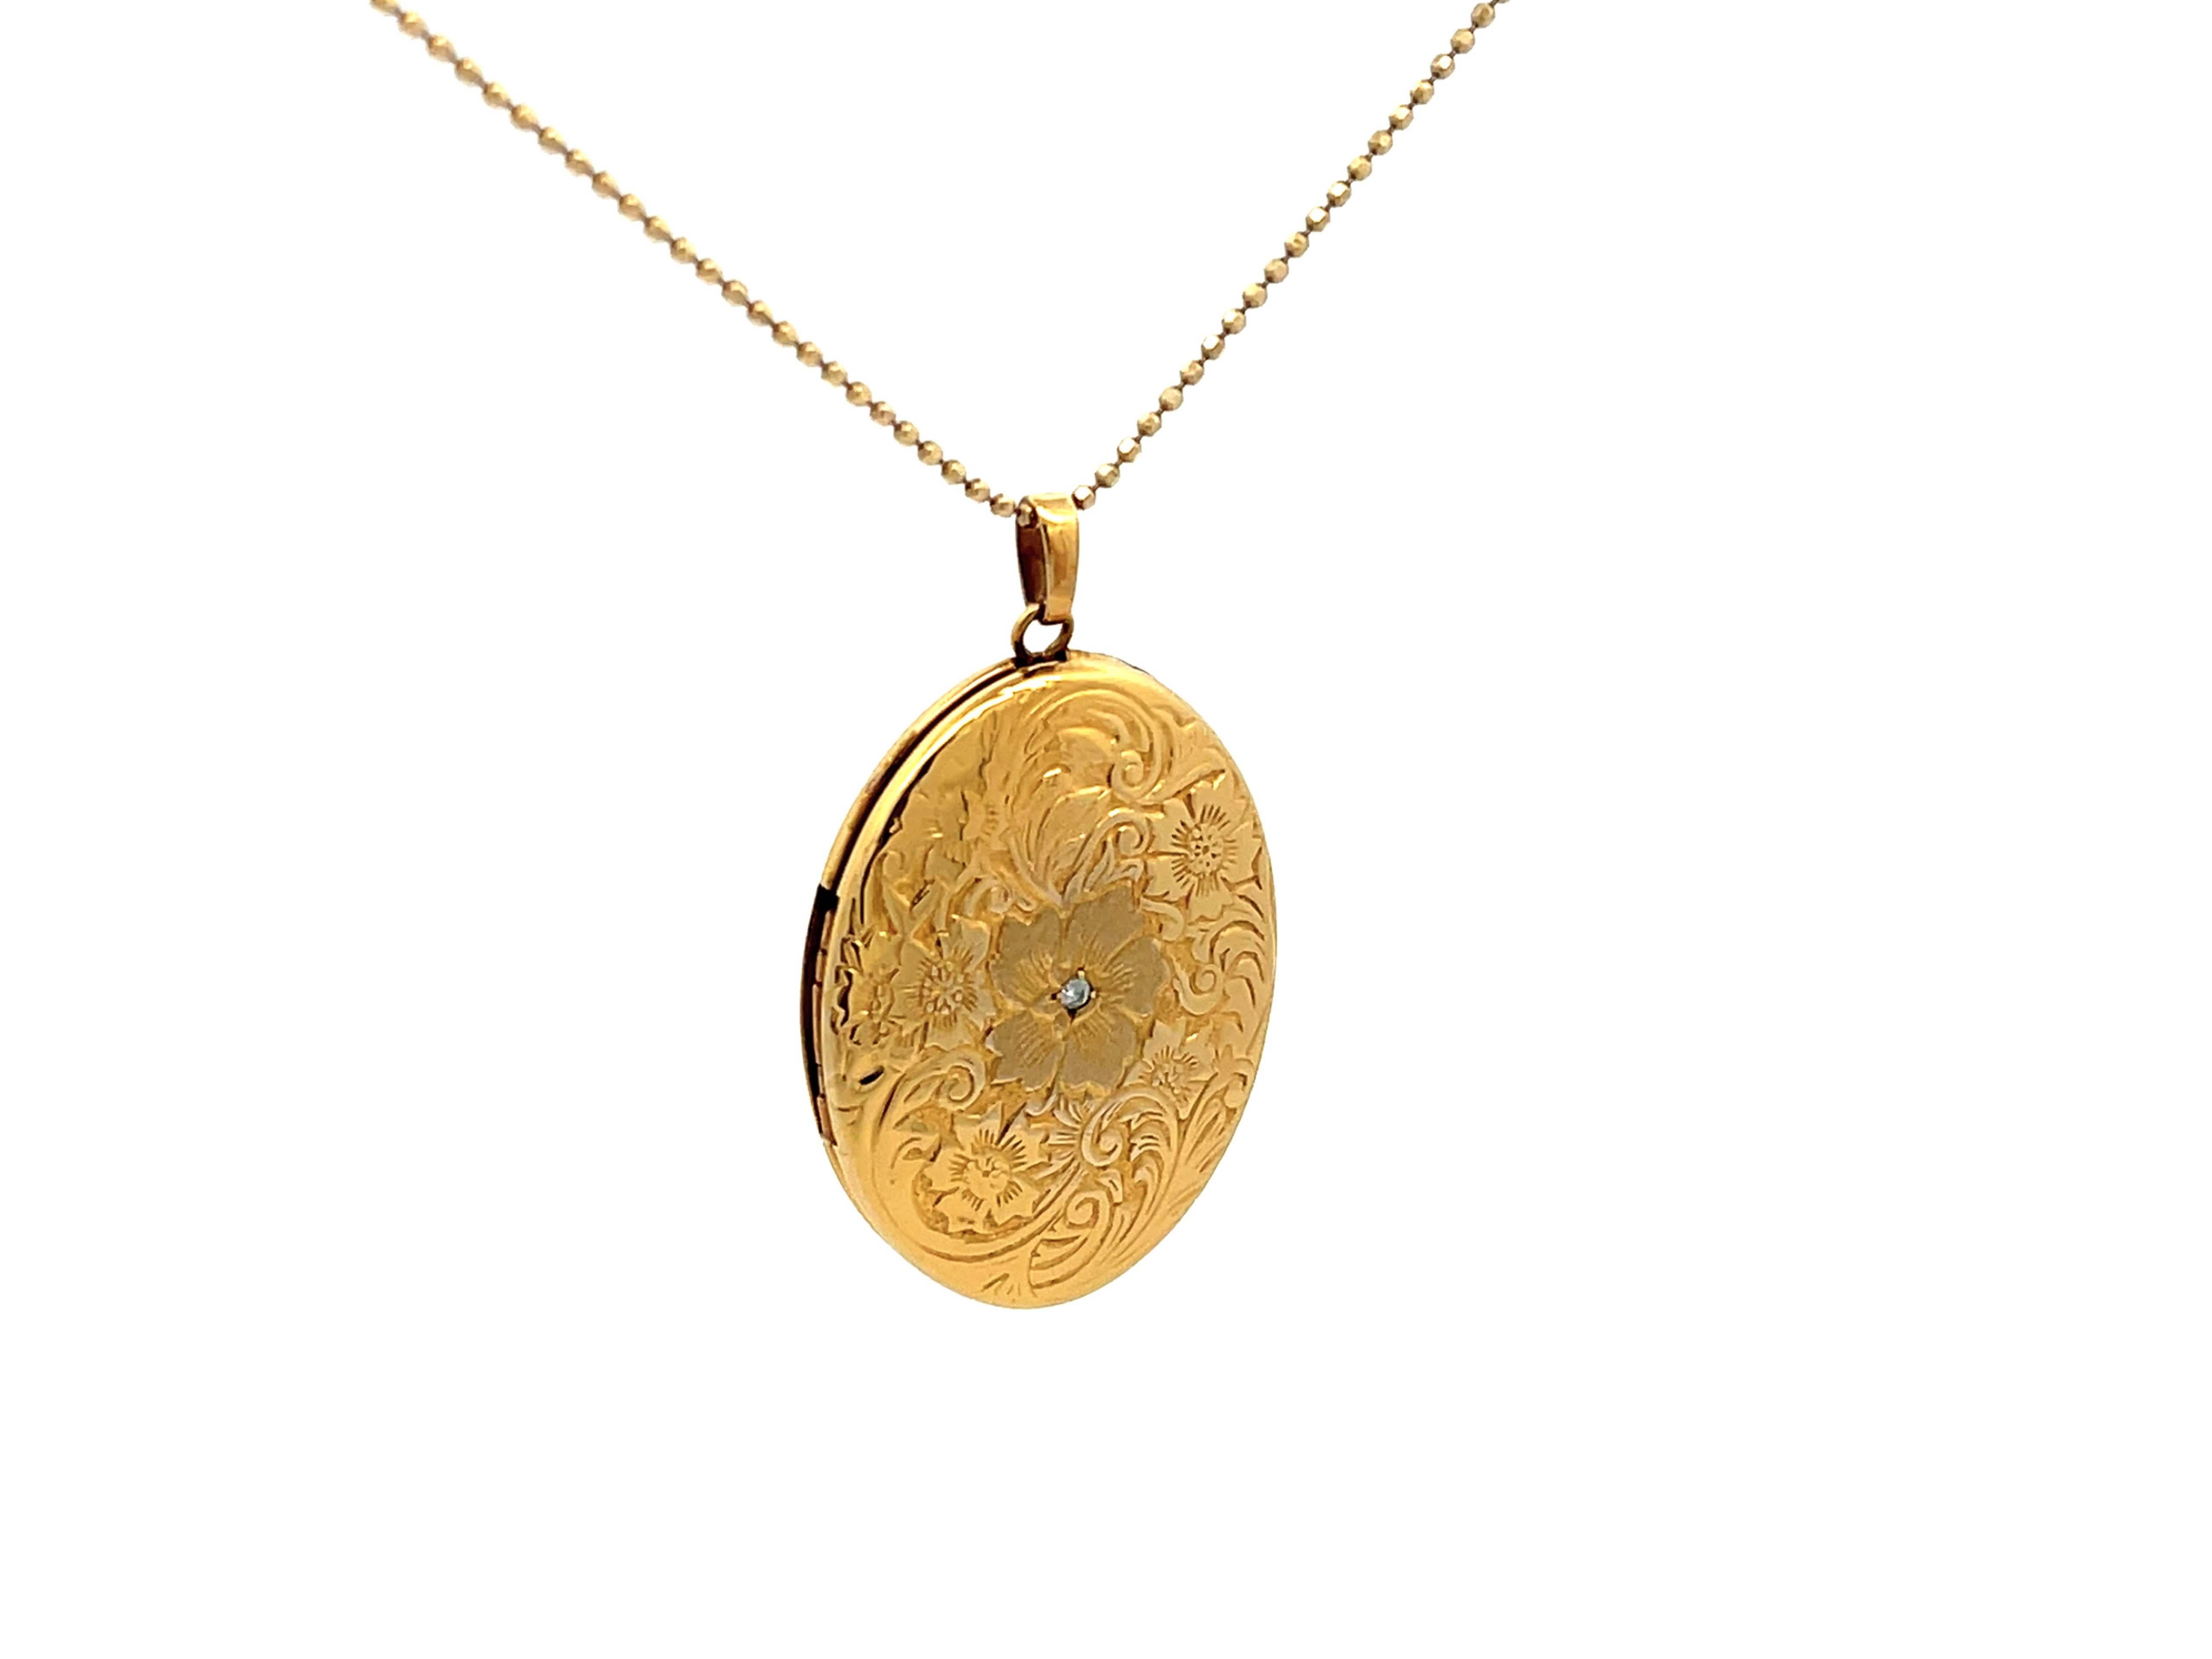 Brilliant Cut Engraved Diamond Plumeria Oval Locket Necklace in 14k Yellow Gold For Sale